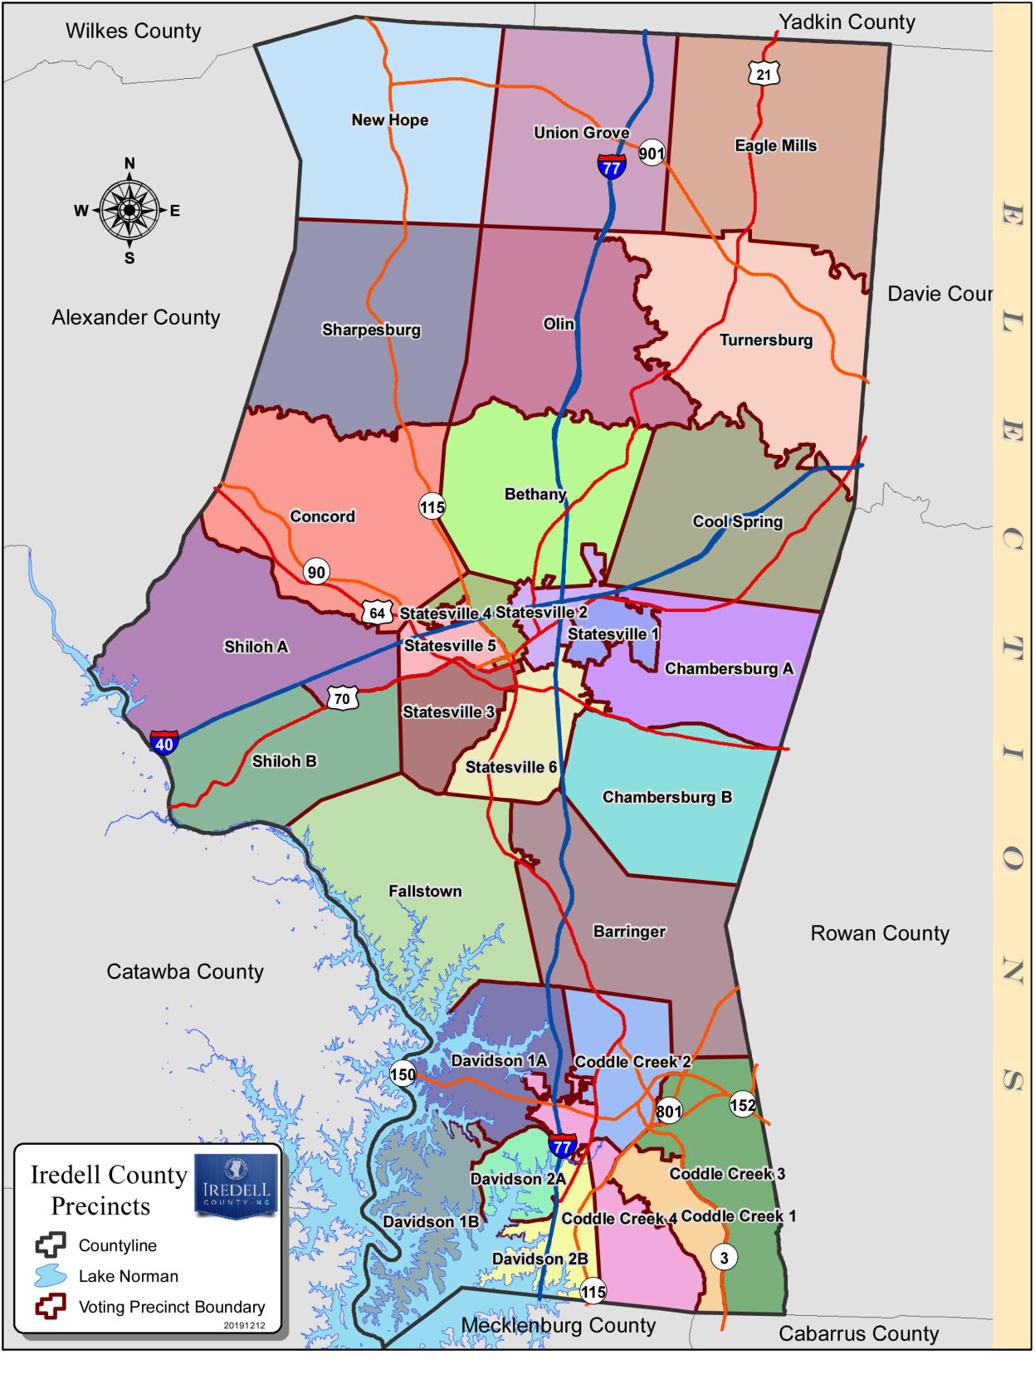 Where to vote in Iredell County